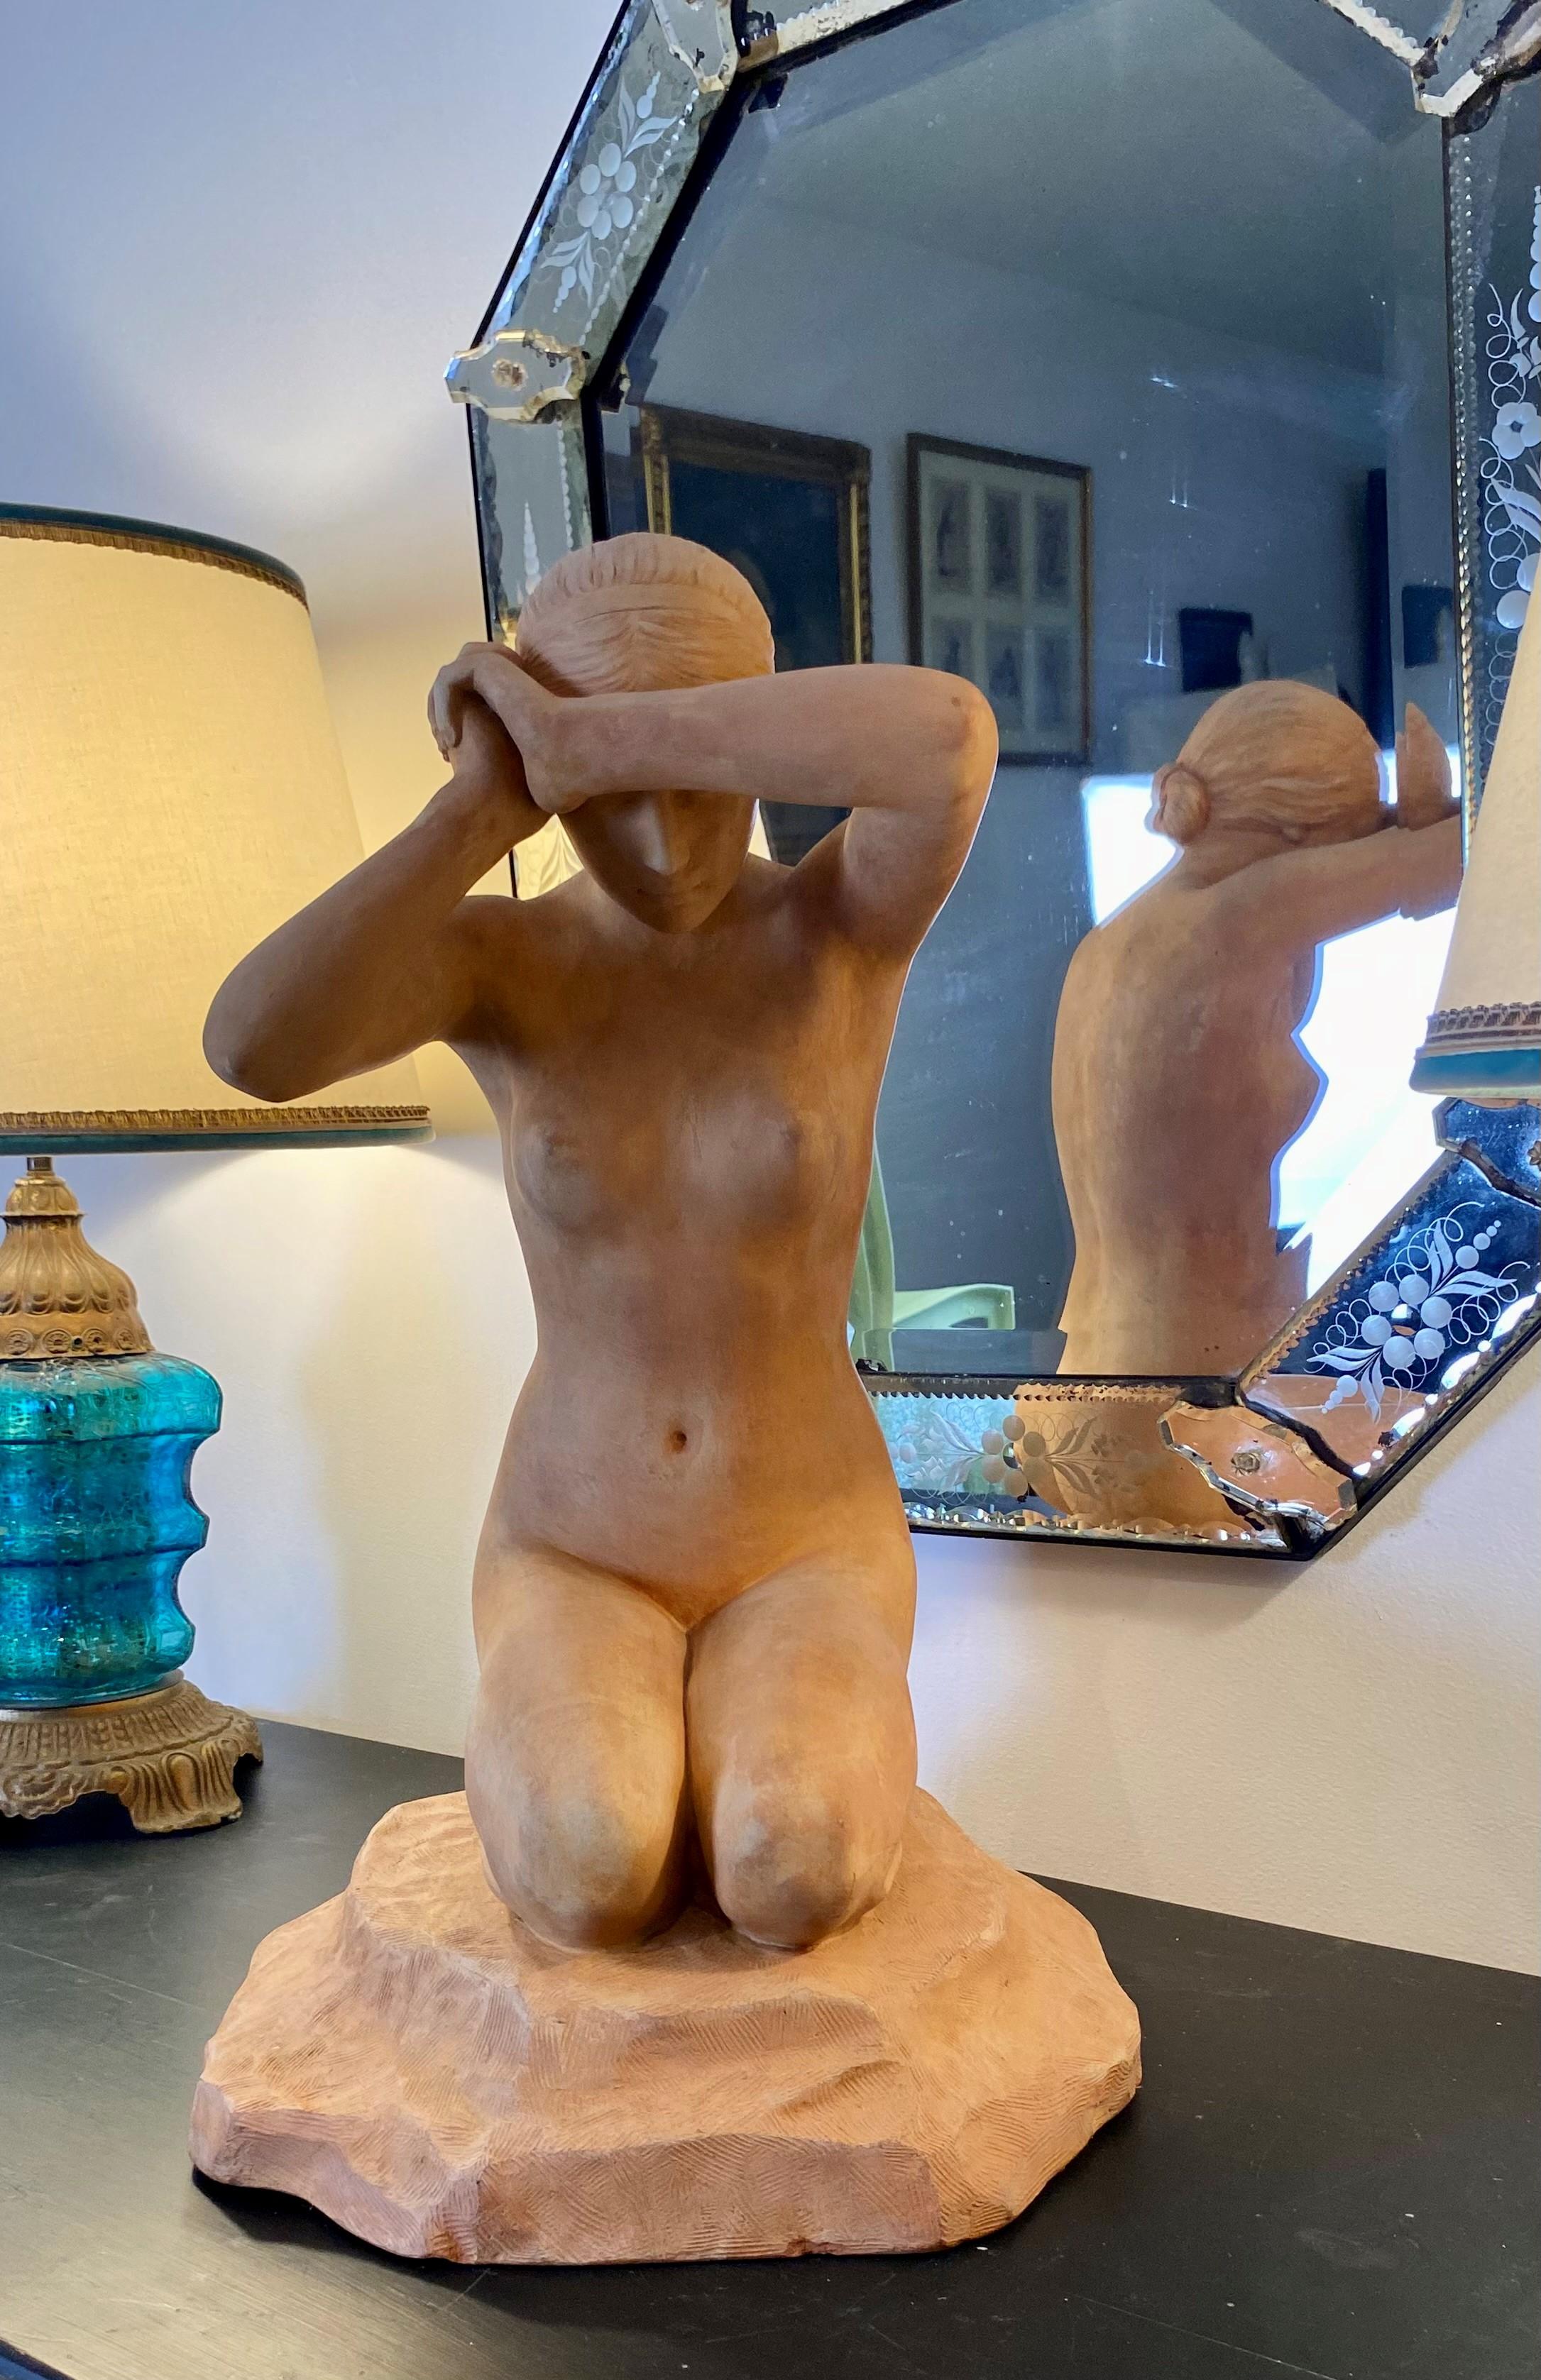 French Terracotta Sculpture Nude Woman 